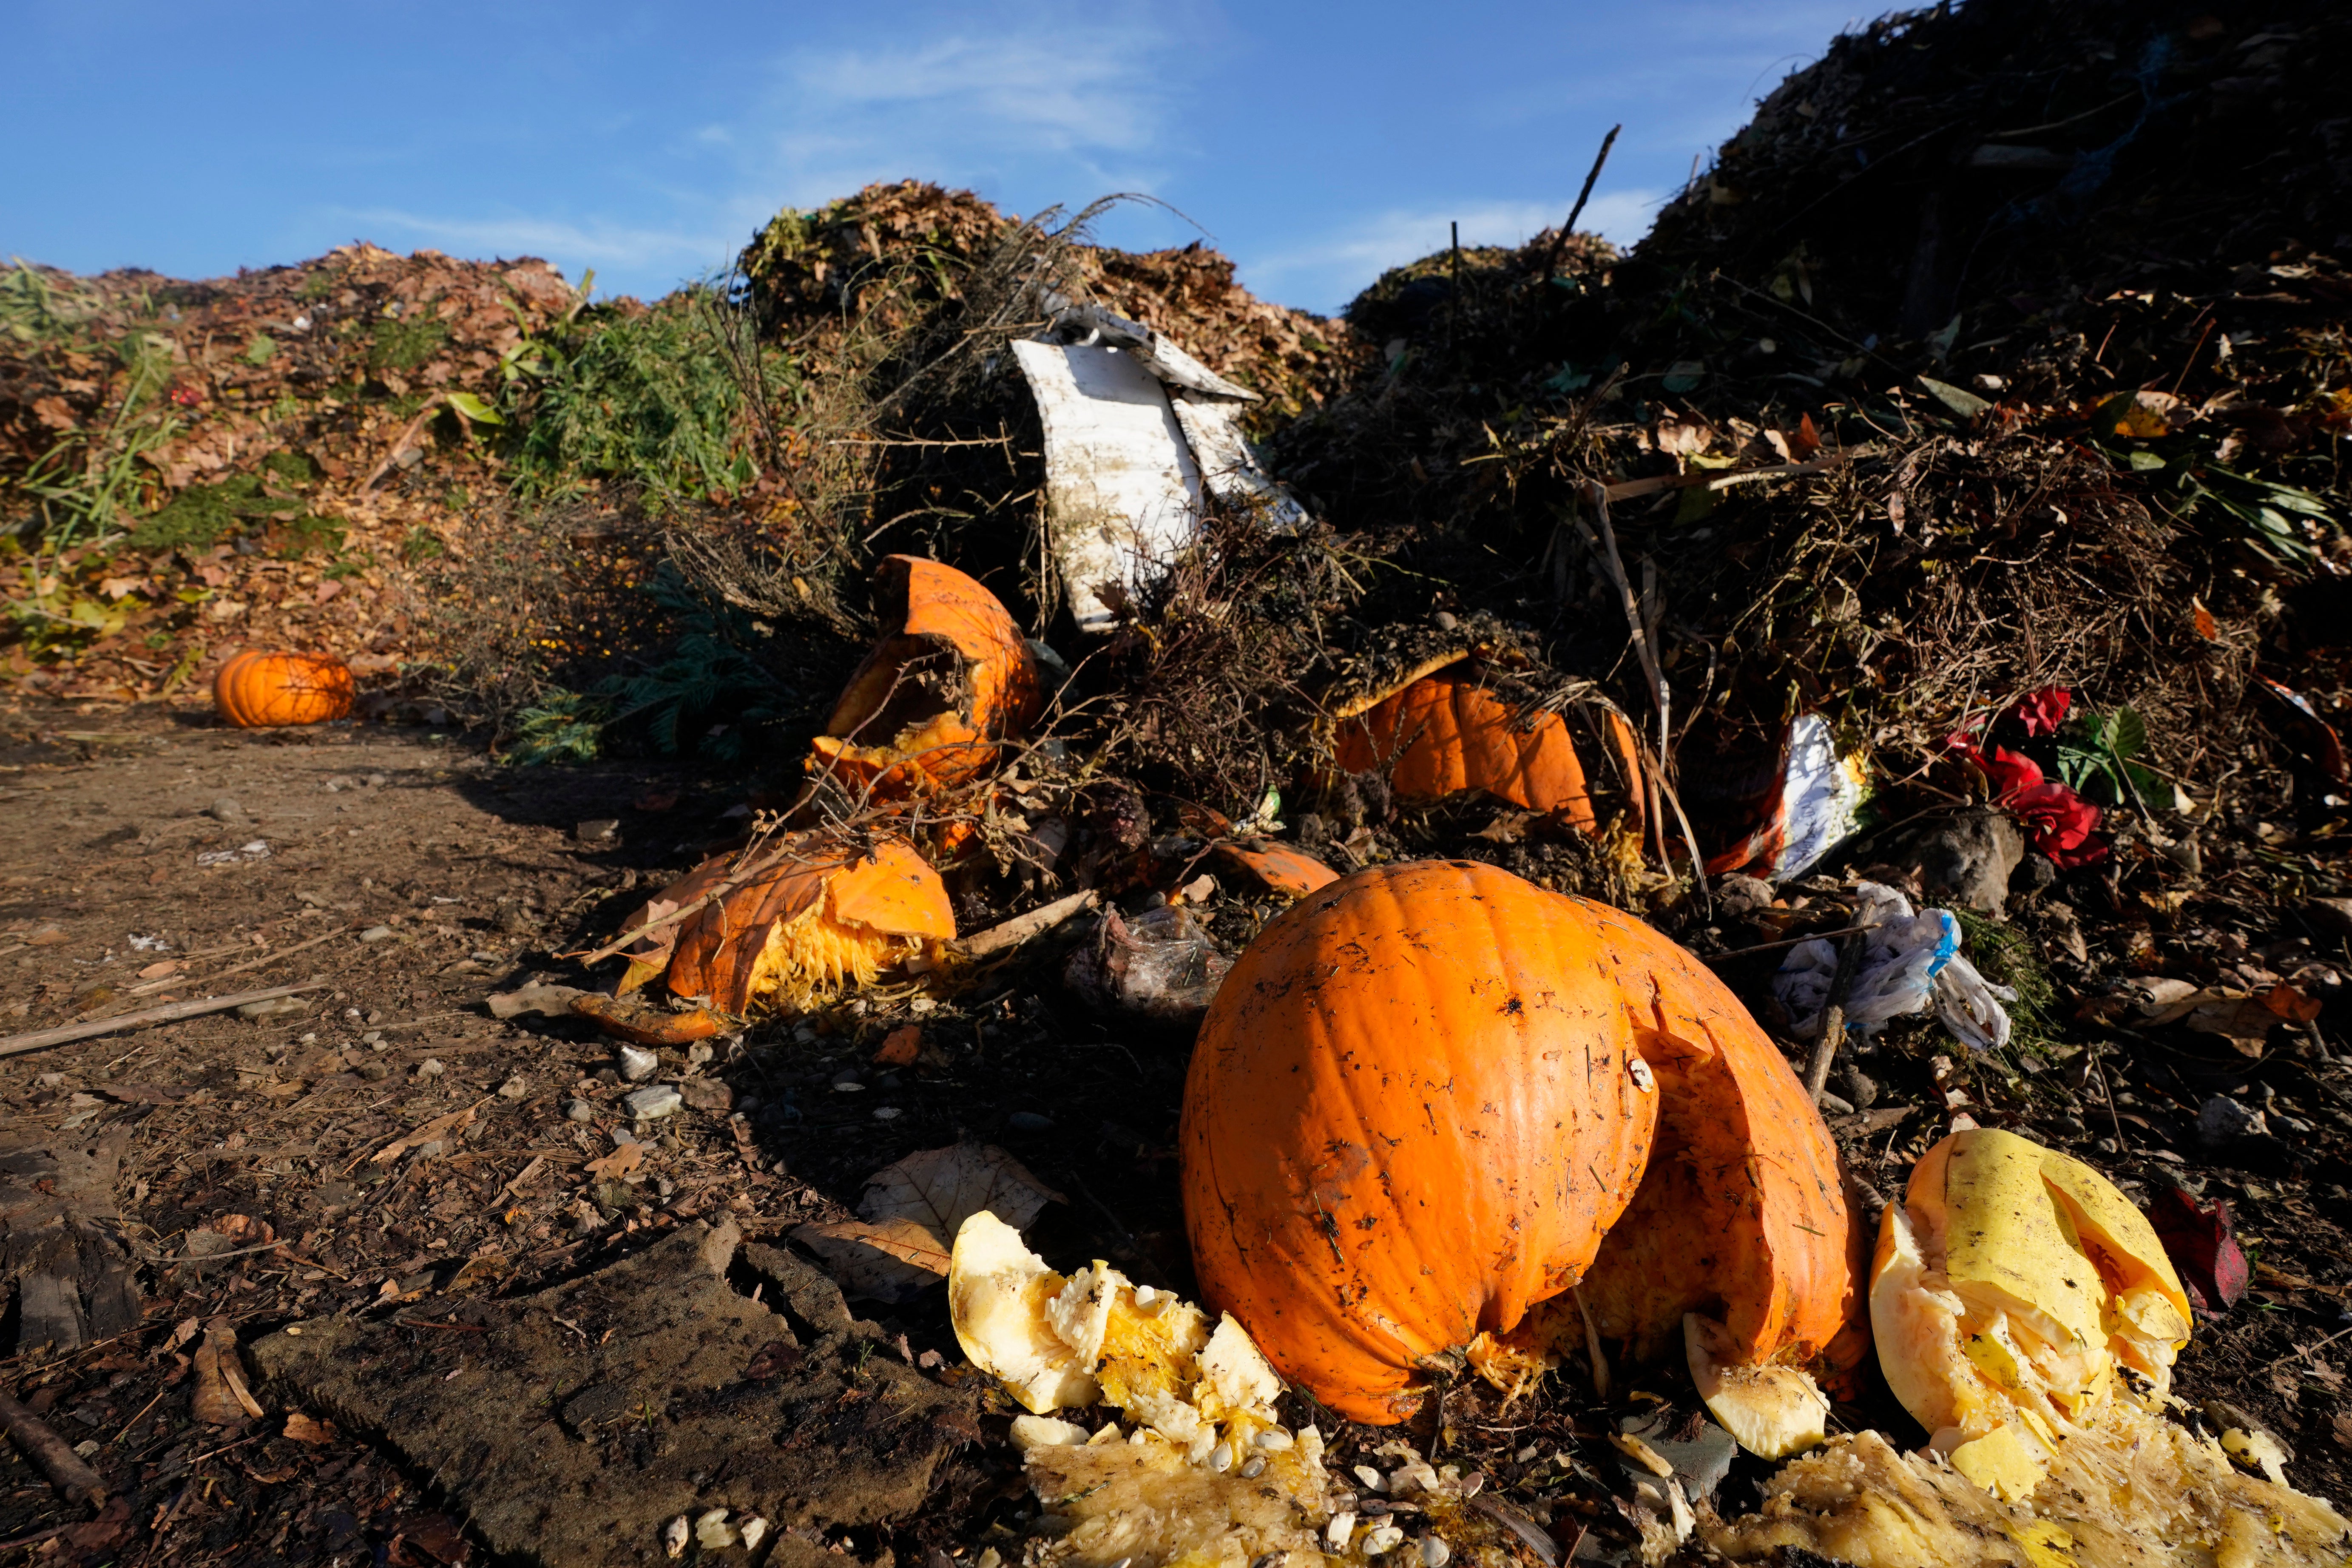 Pumpkins and other compostable waste at the Anaerobic Composter Facility in Woodland, California. (Photo: Rich Pedroncelli, AP)